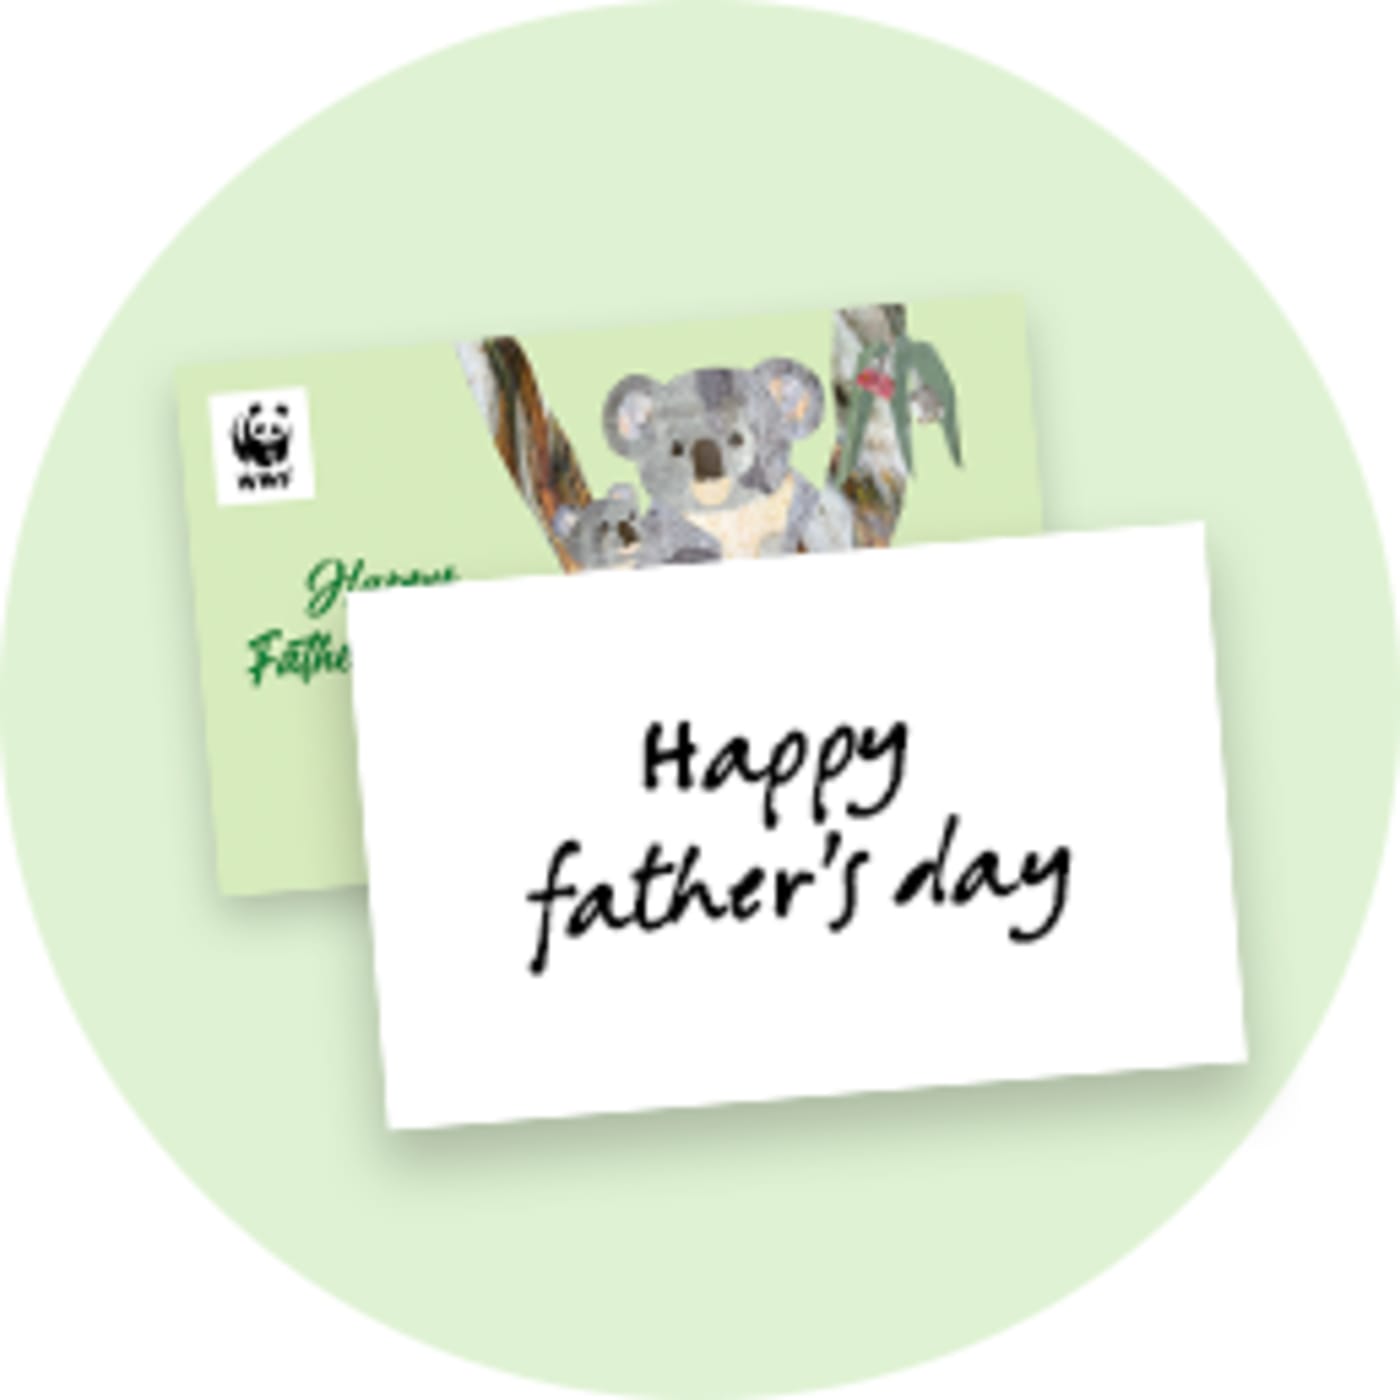 Illustration of a Wildcard design featuring a koala and text 'Happy Father's Day'